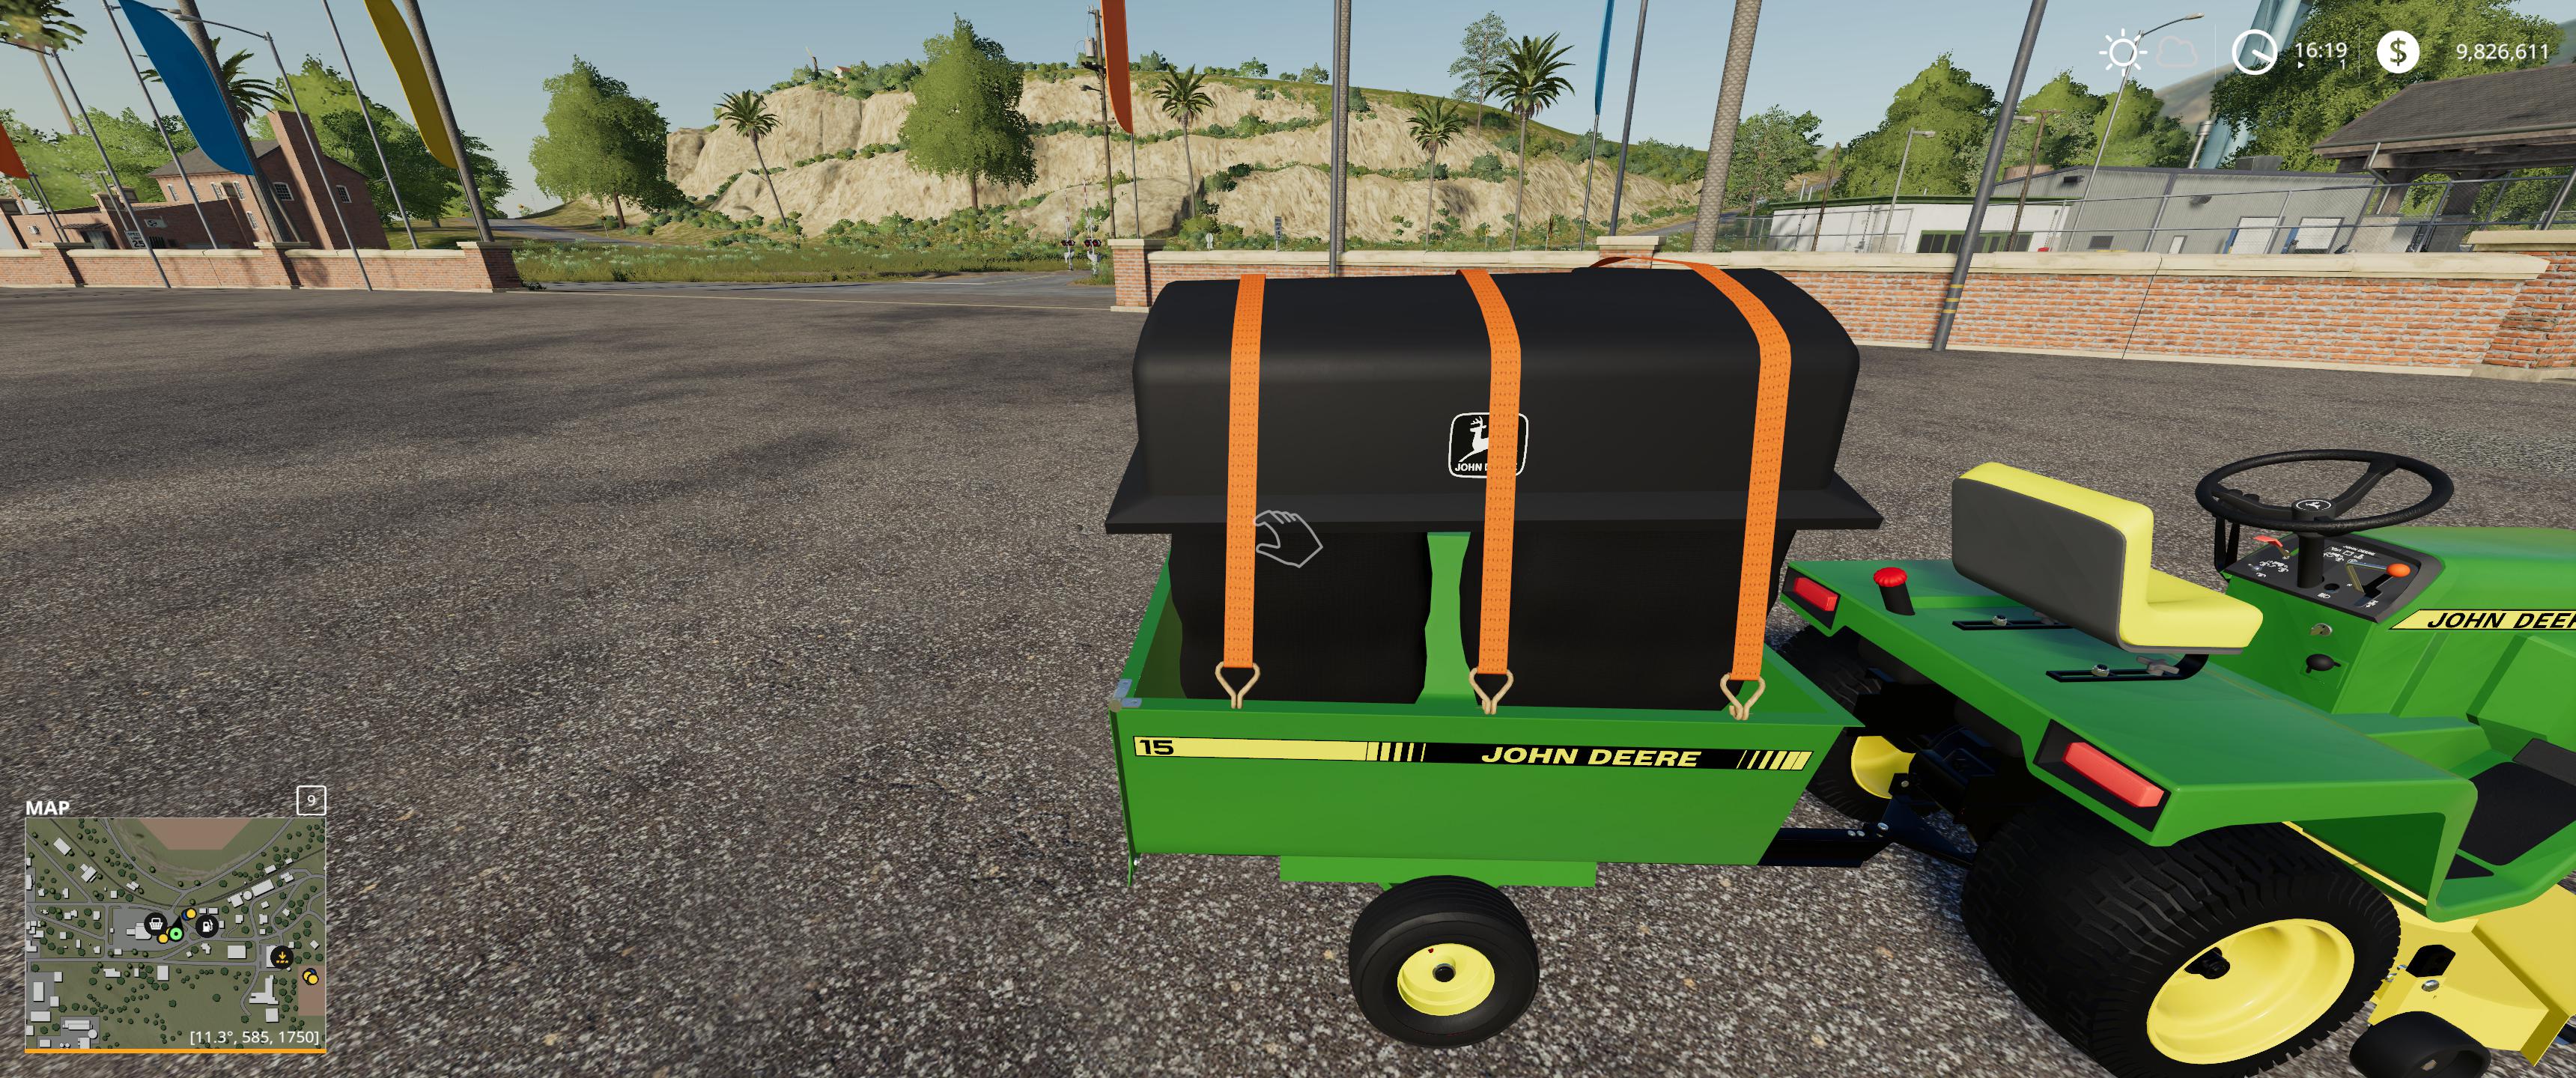 John Deere 332 Lawn Tractor With Lawn Mower And Garden V2 0 Fs19